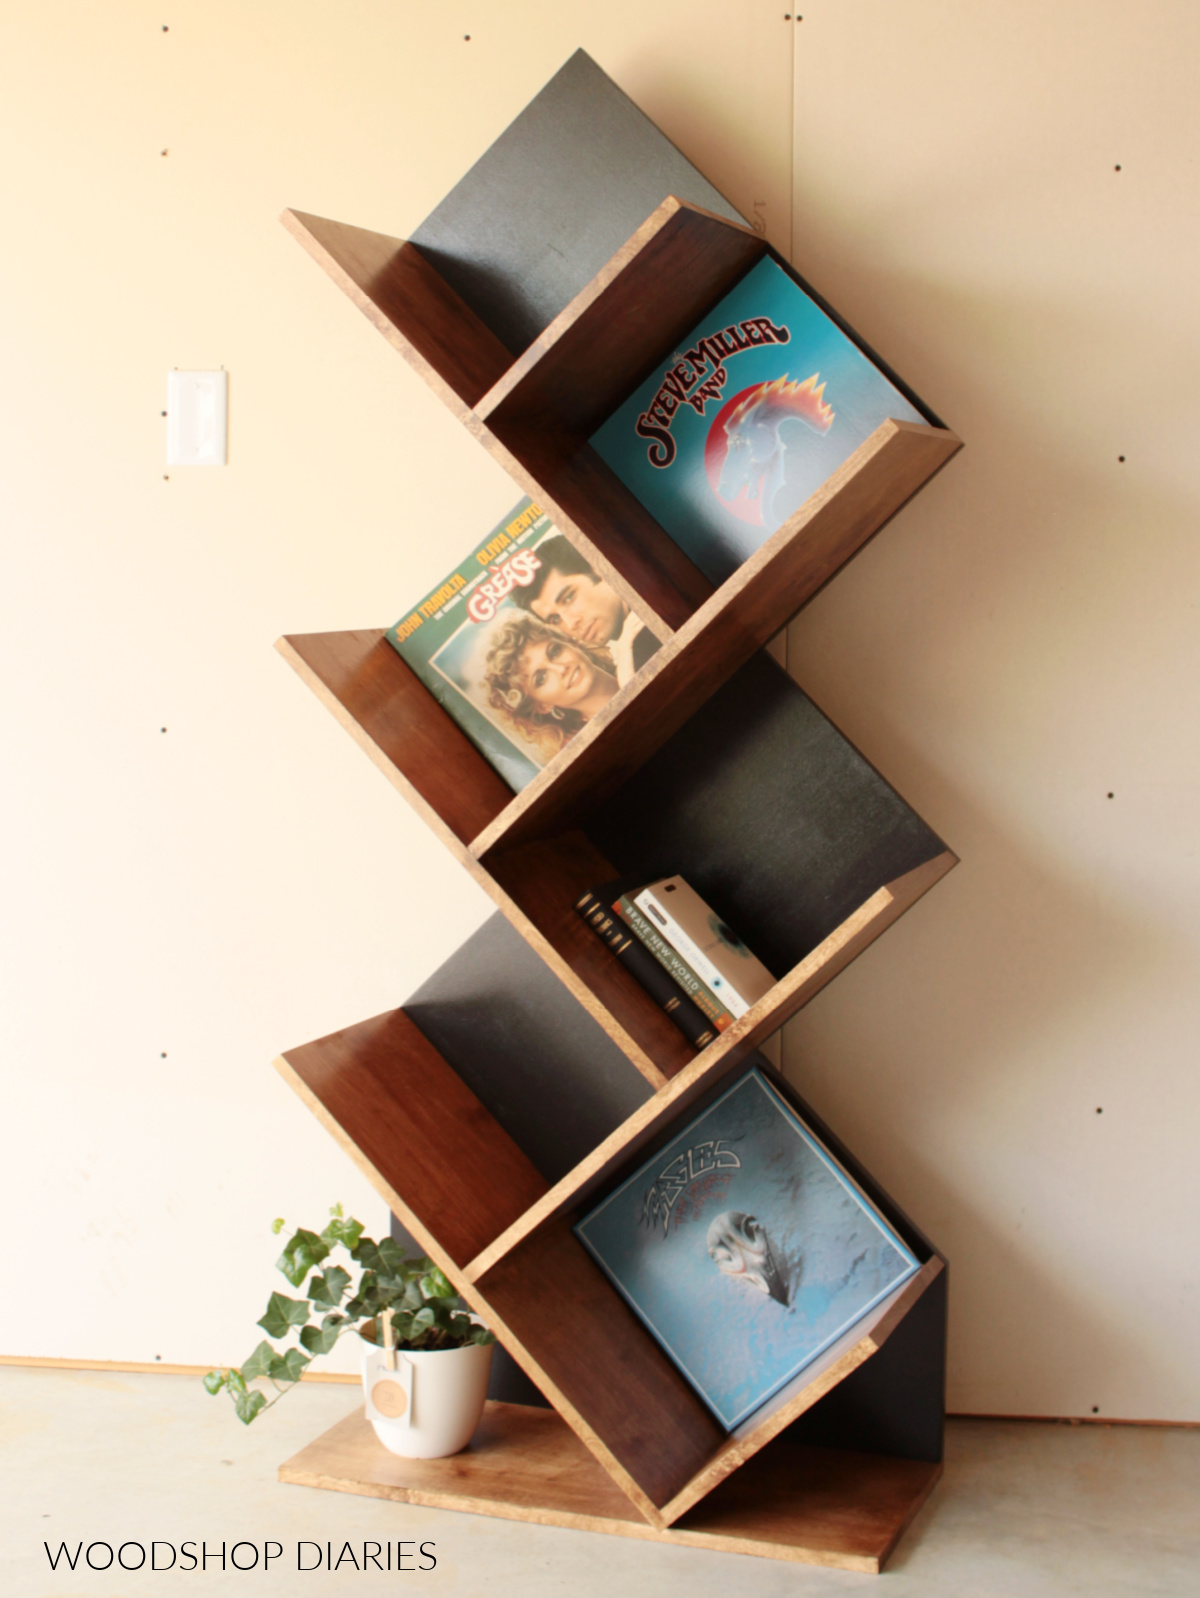 How to Store and Display Vinyl Records Safely